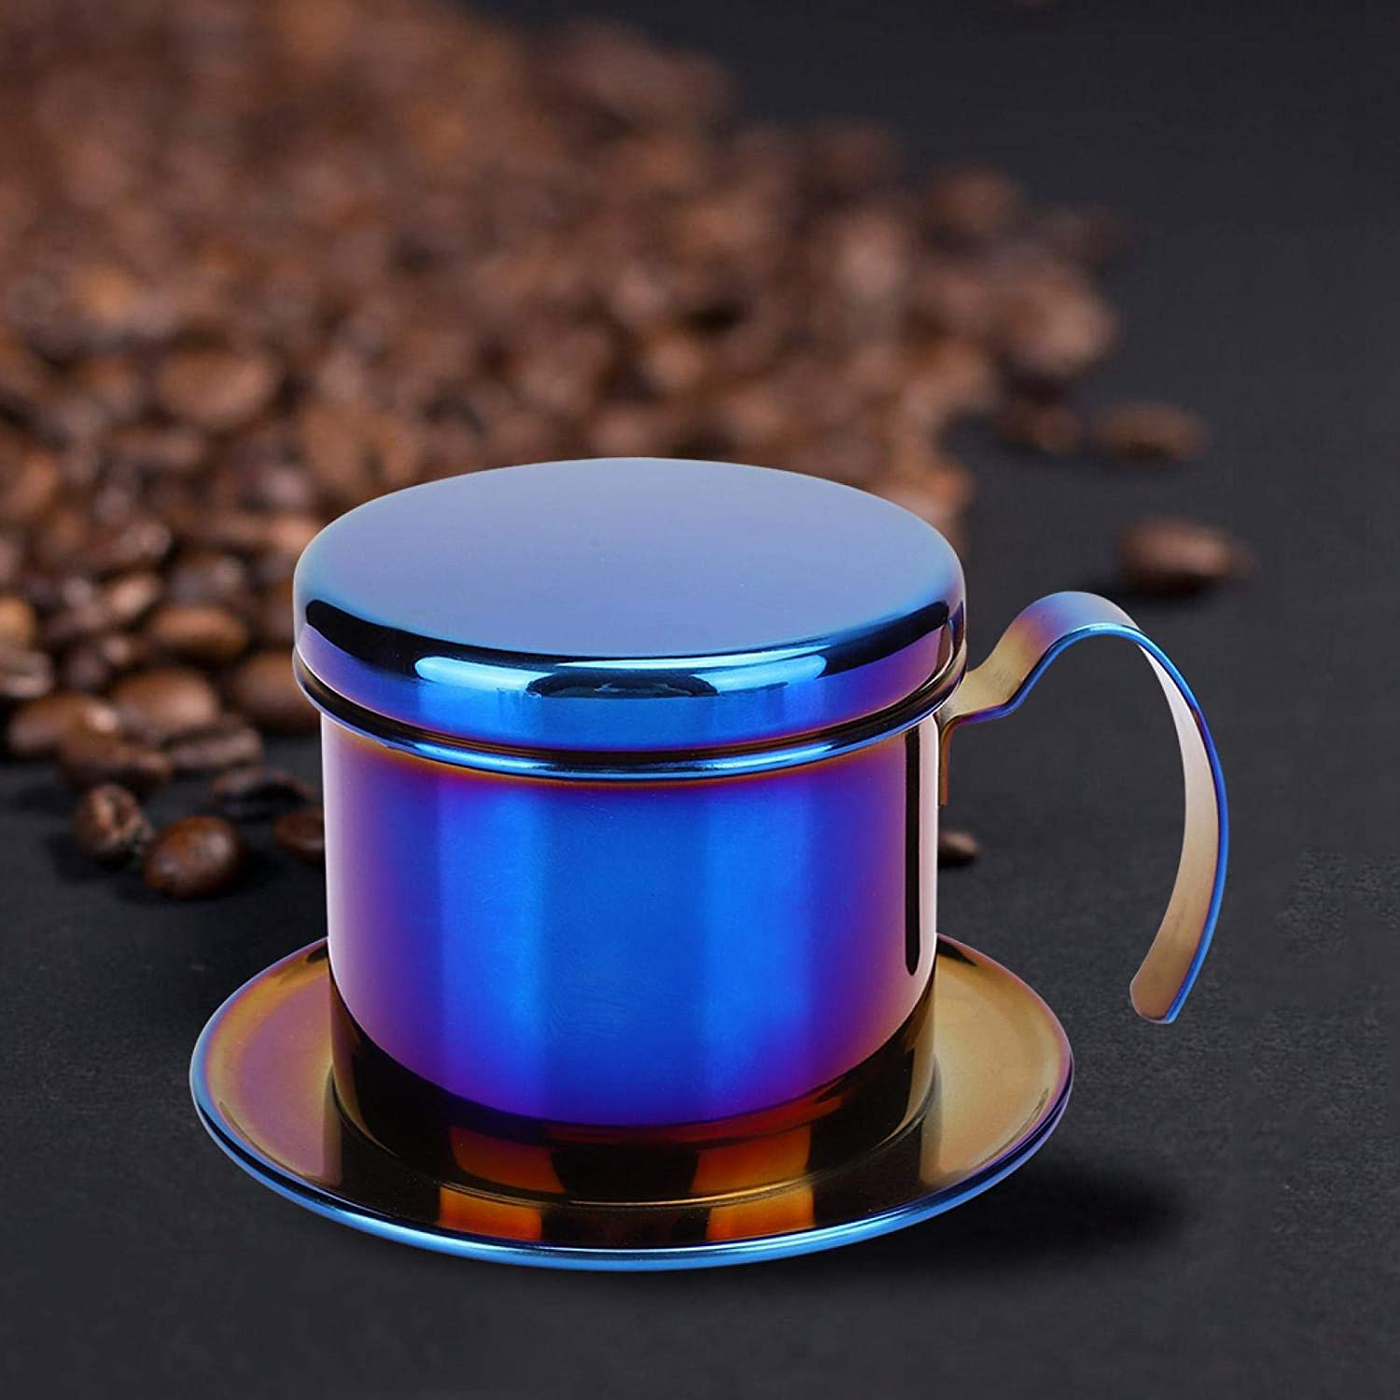 Coffee Drip Filter Pot Stainless Steel Vietnamese Style Coffee Maker Pot Coffee Drip Brewer for Home Kitchen Office Outdoor(blue)